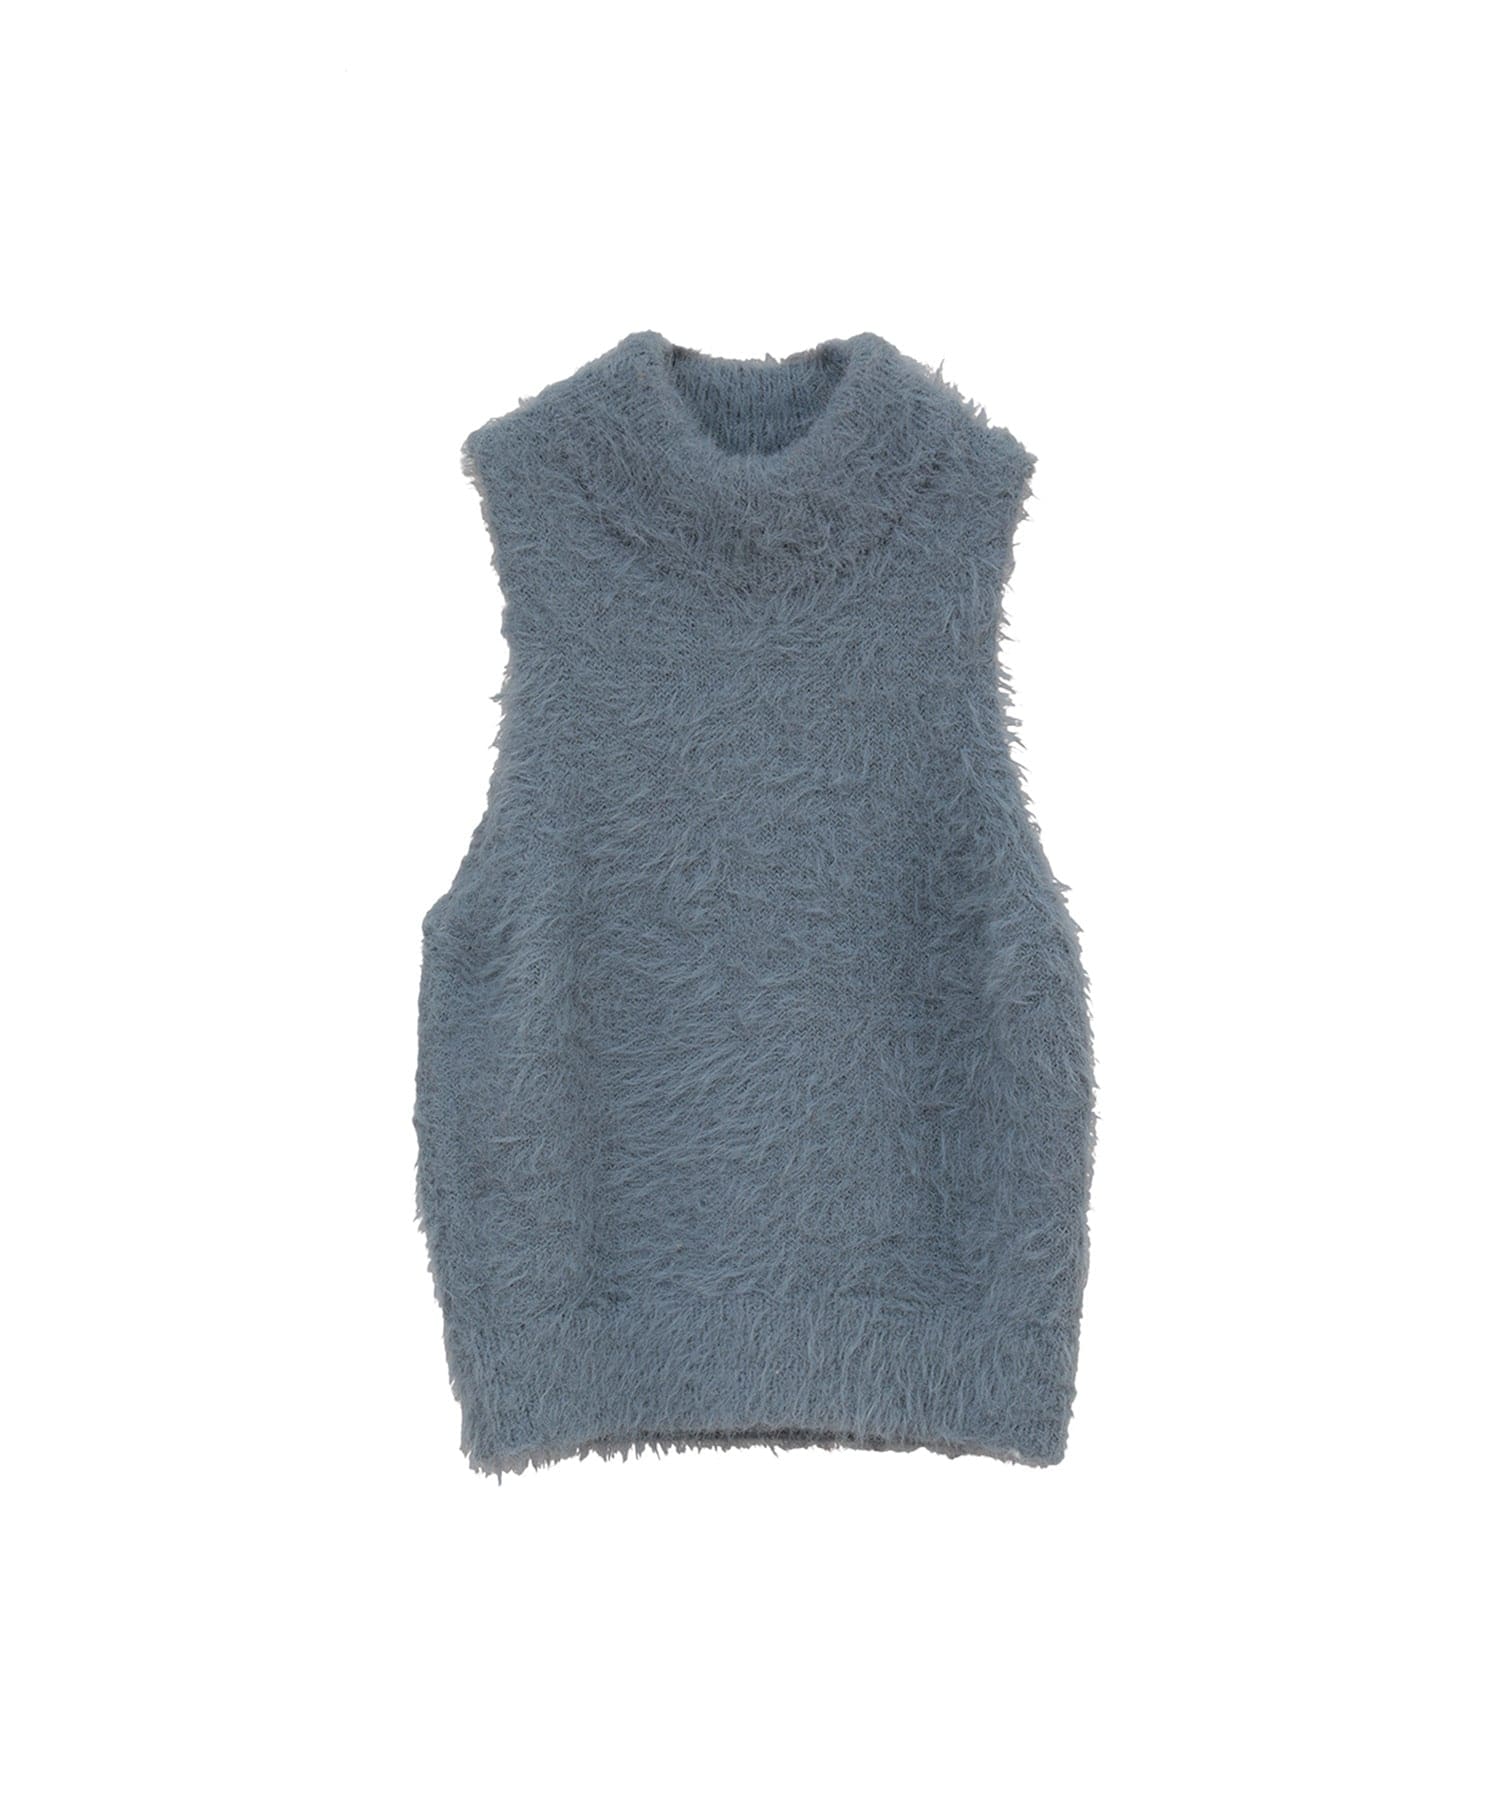 SHAGGY AMERICAN SLEEVE KNIT TOPS CLANE